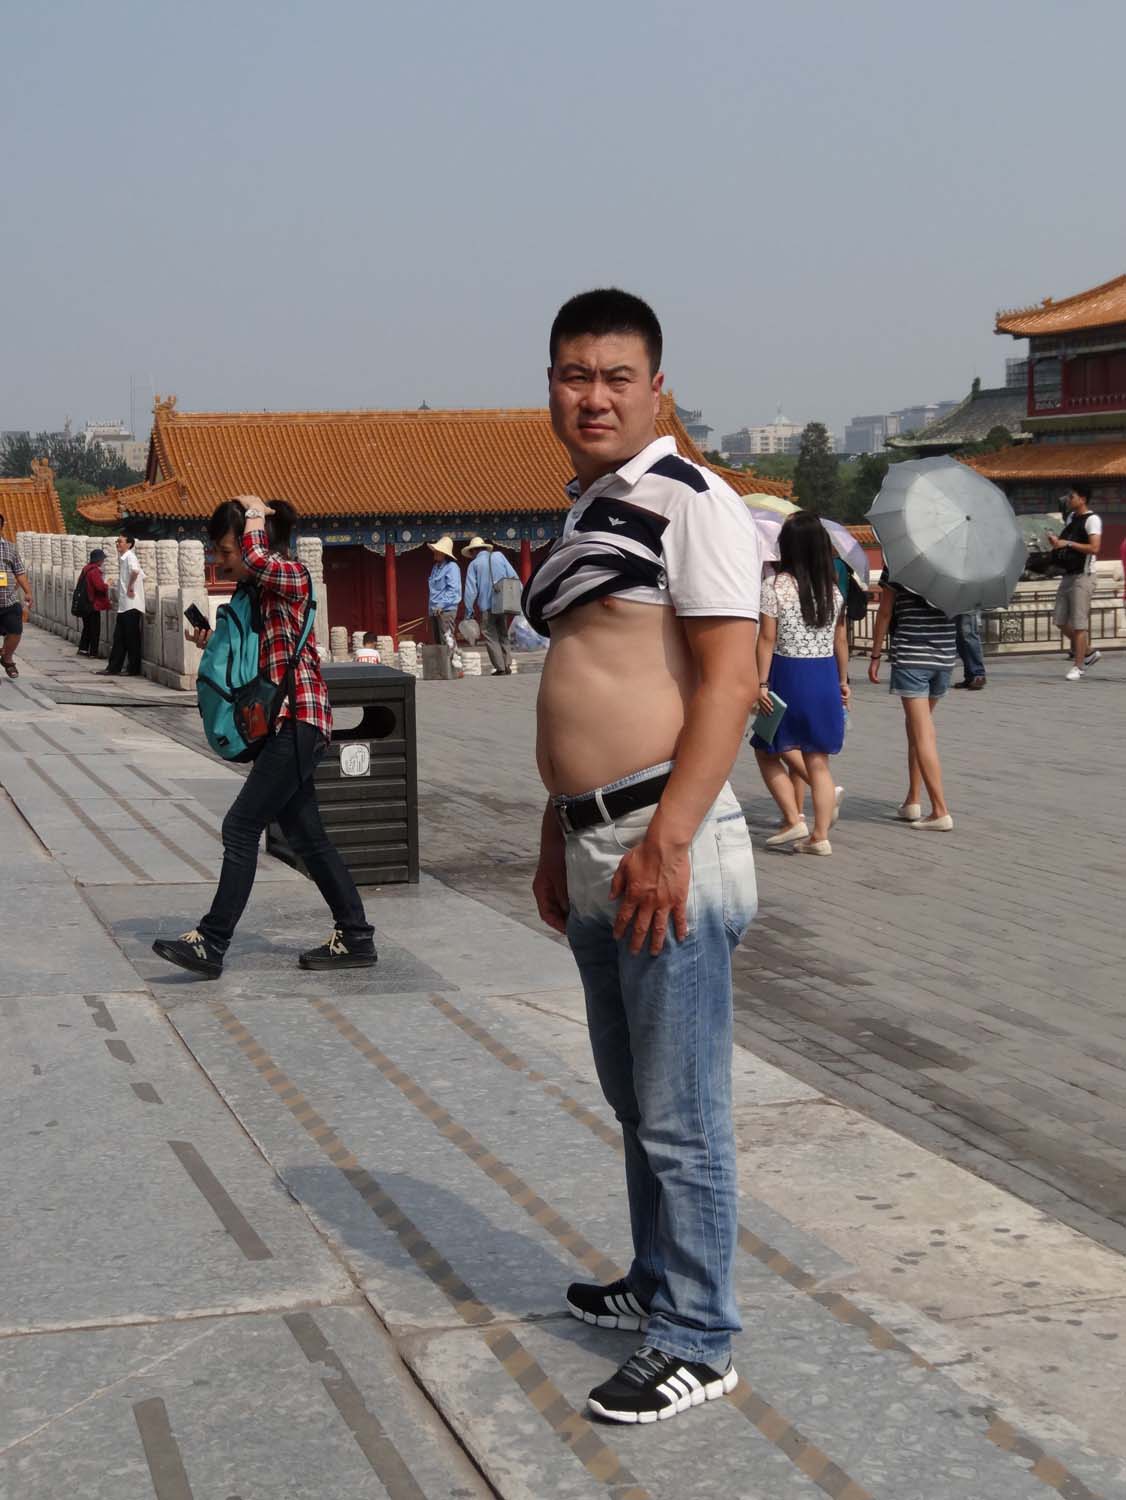 Chinese men looove showing their bellies, the bigger the better!